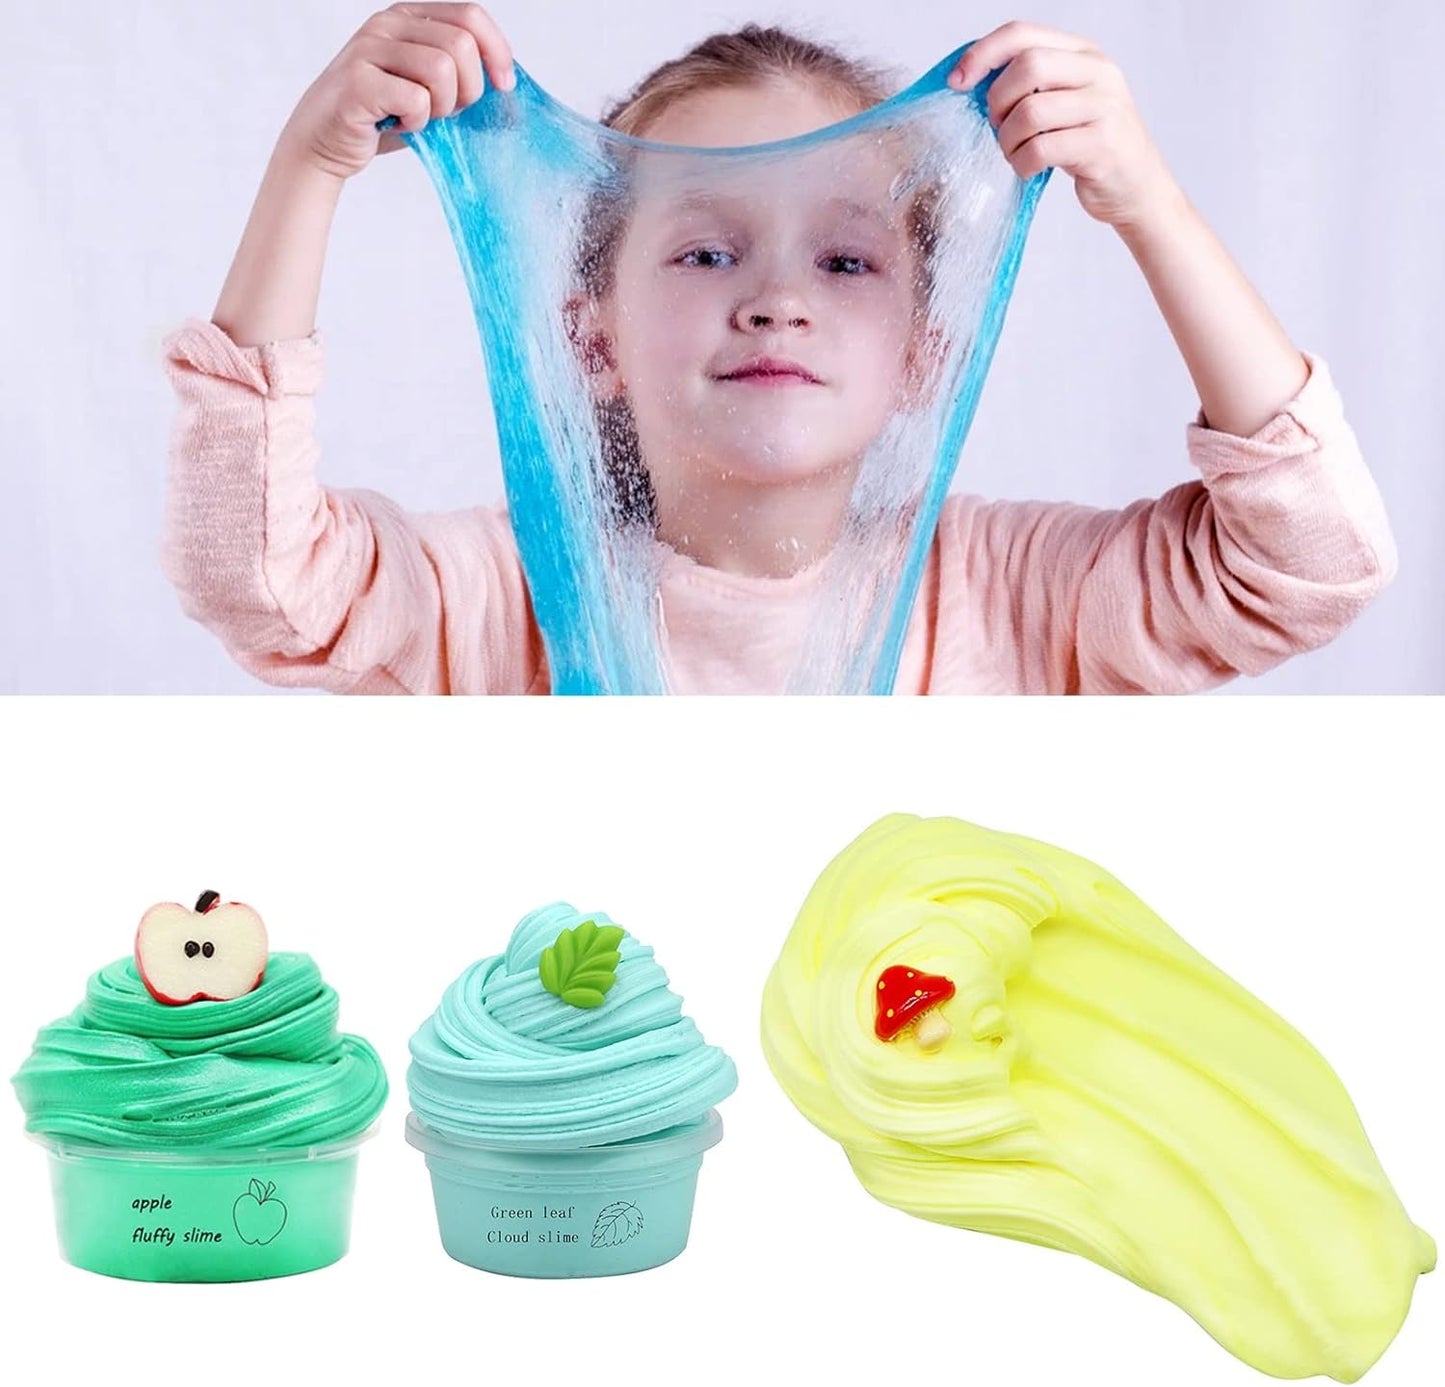 Butter Slime Kit, 1 Pack 60Ml Slime Sludge Toy with Charm Fruits Scented Stress Relief Sensory Toy K Slime